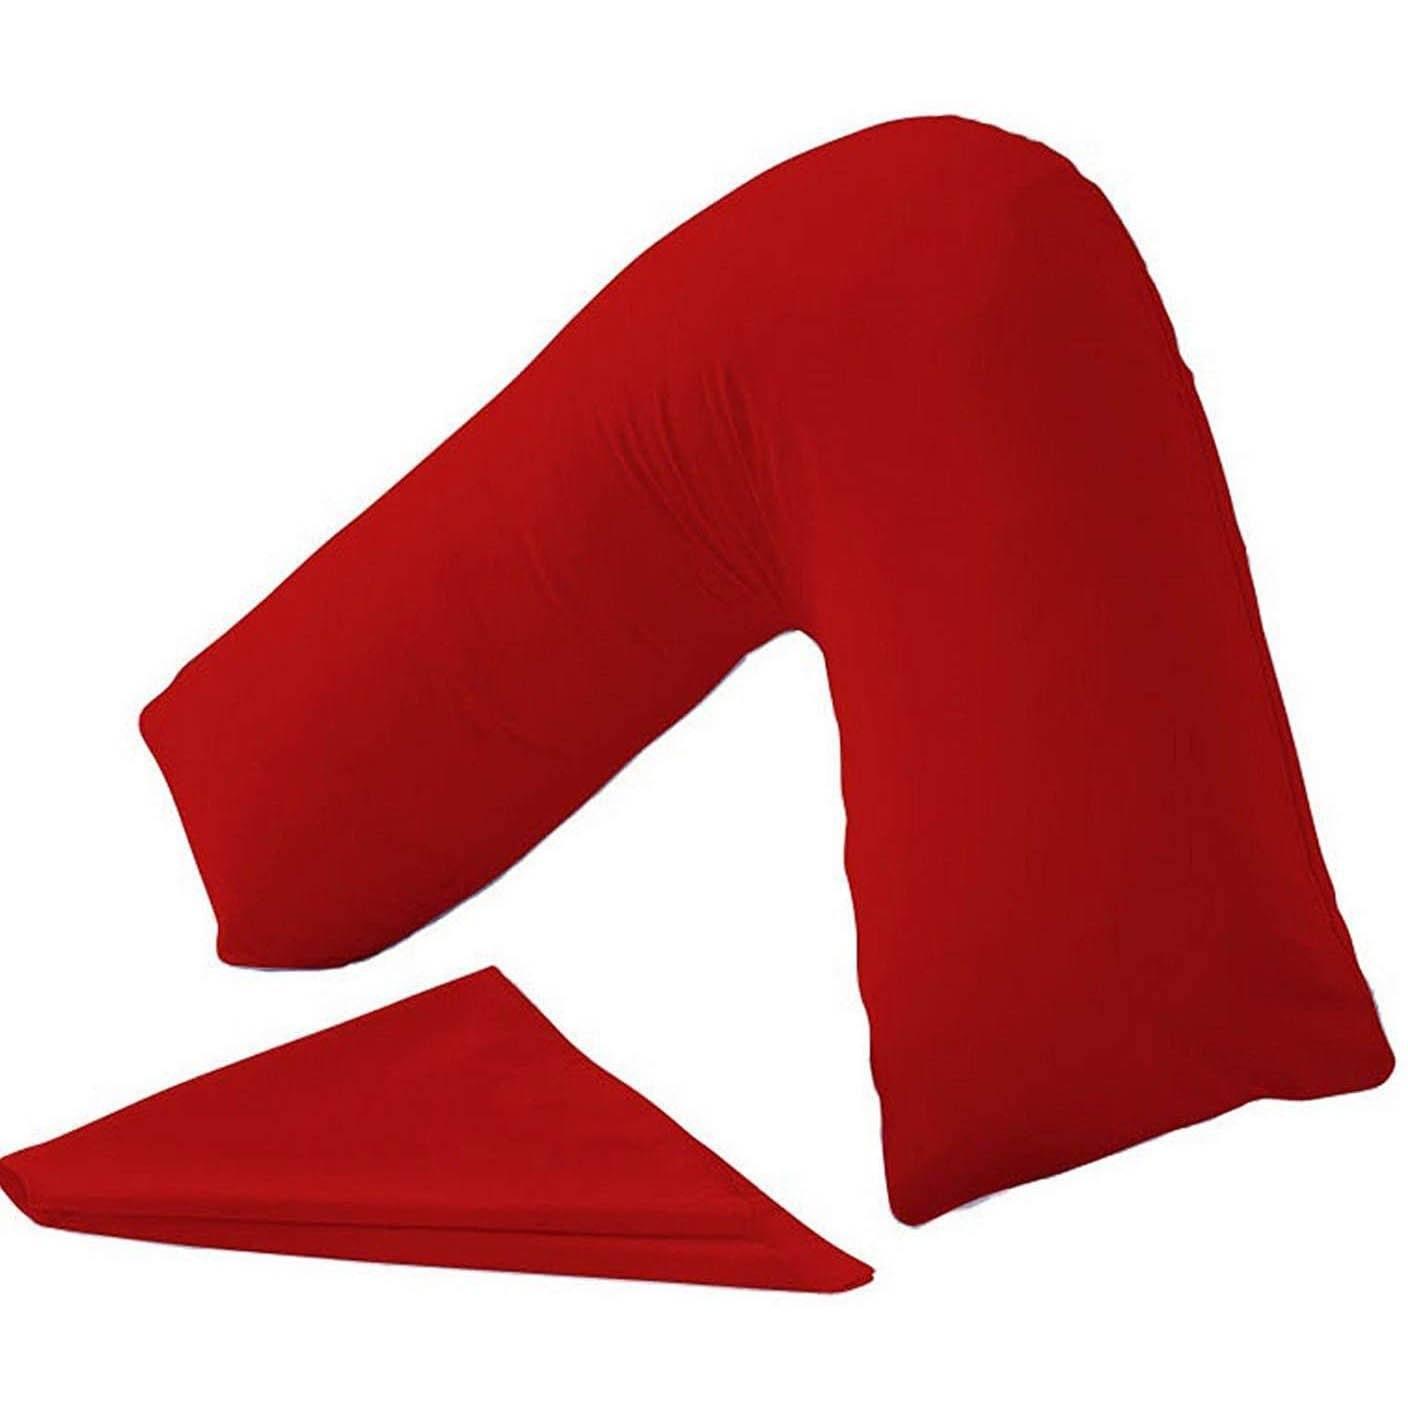 View V Shaped Support Pillow Red information